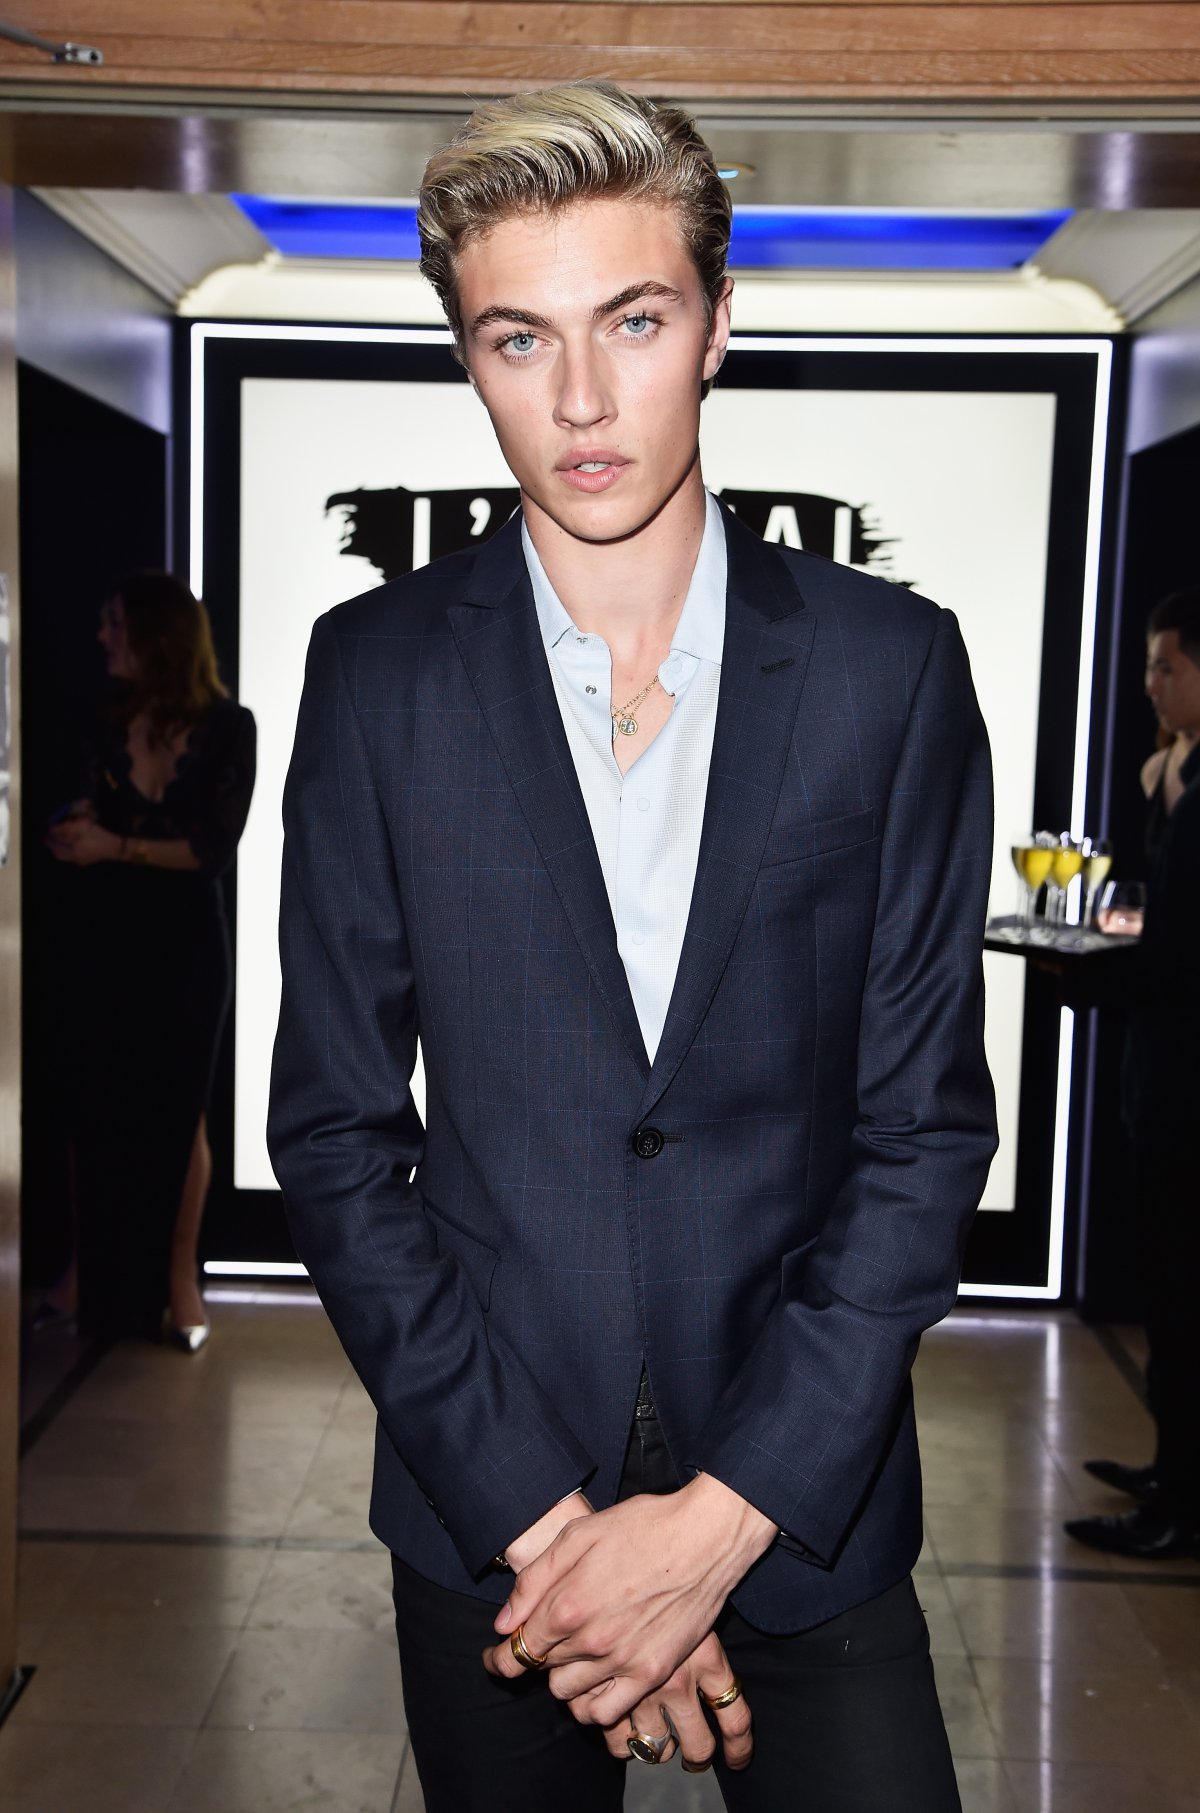 Lucky Blue Smith / Getty